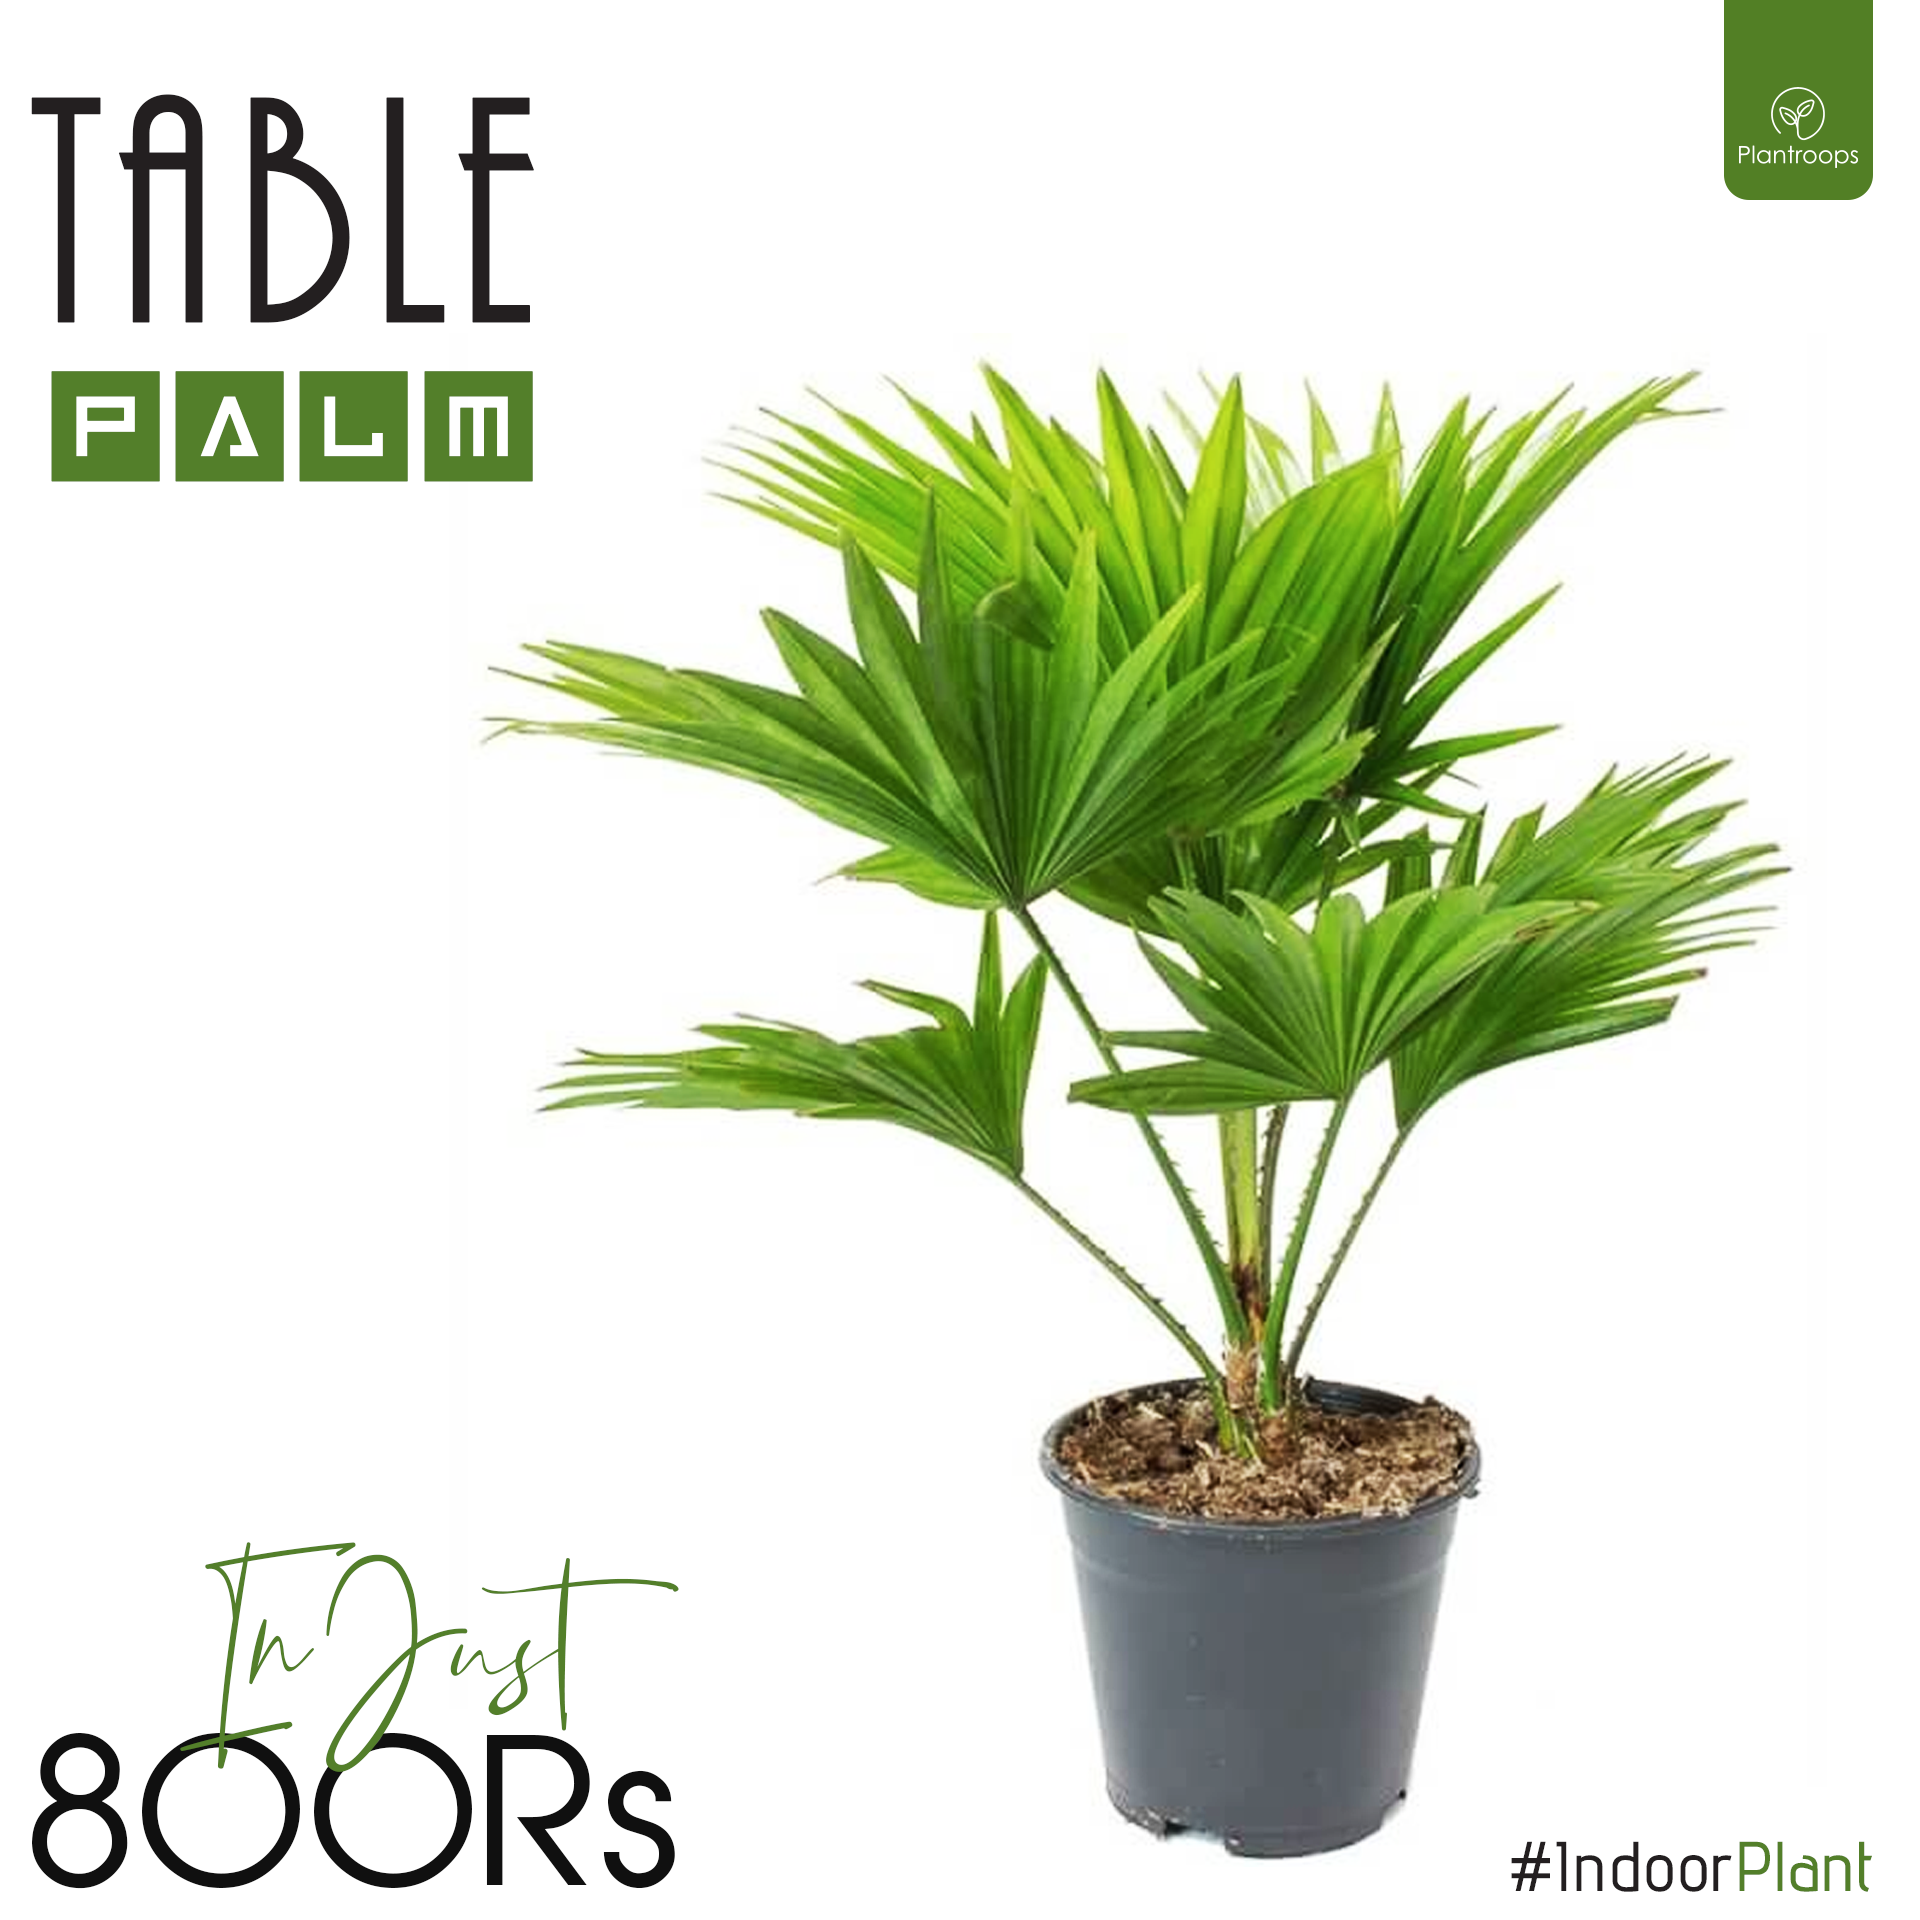 TABLE PALM